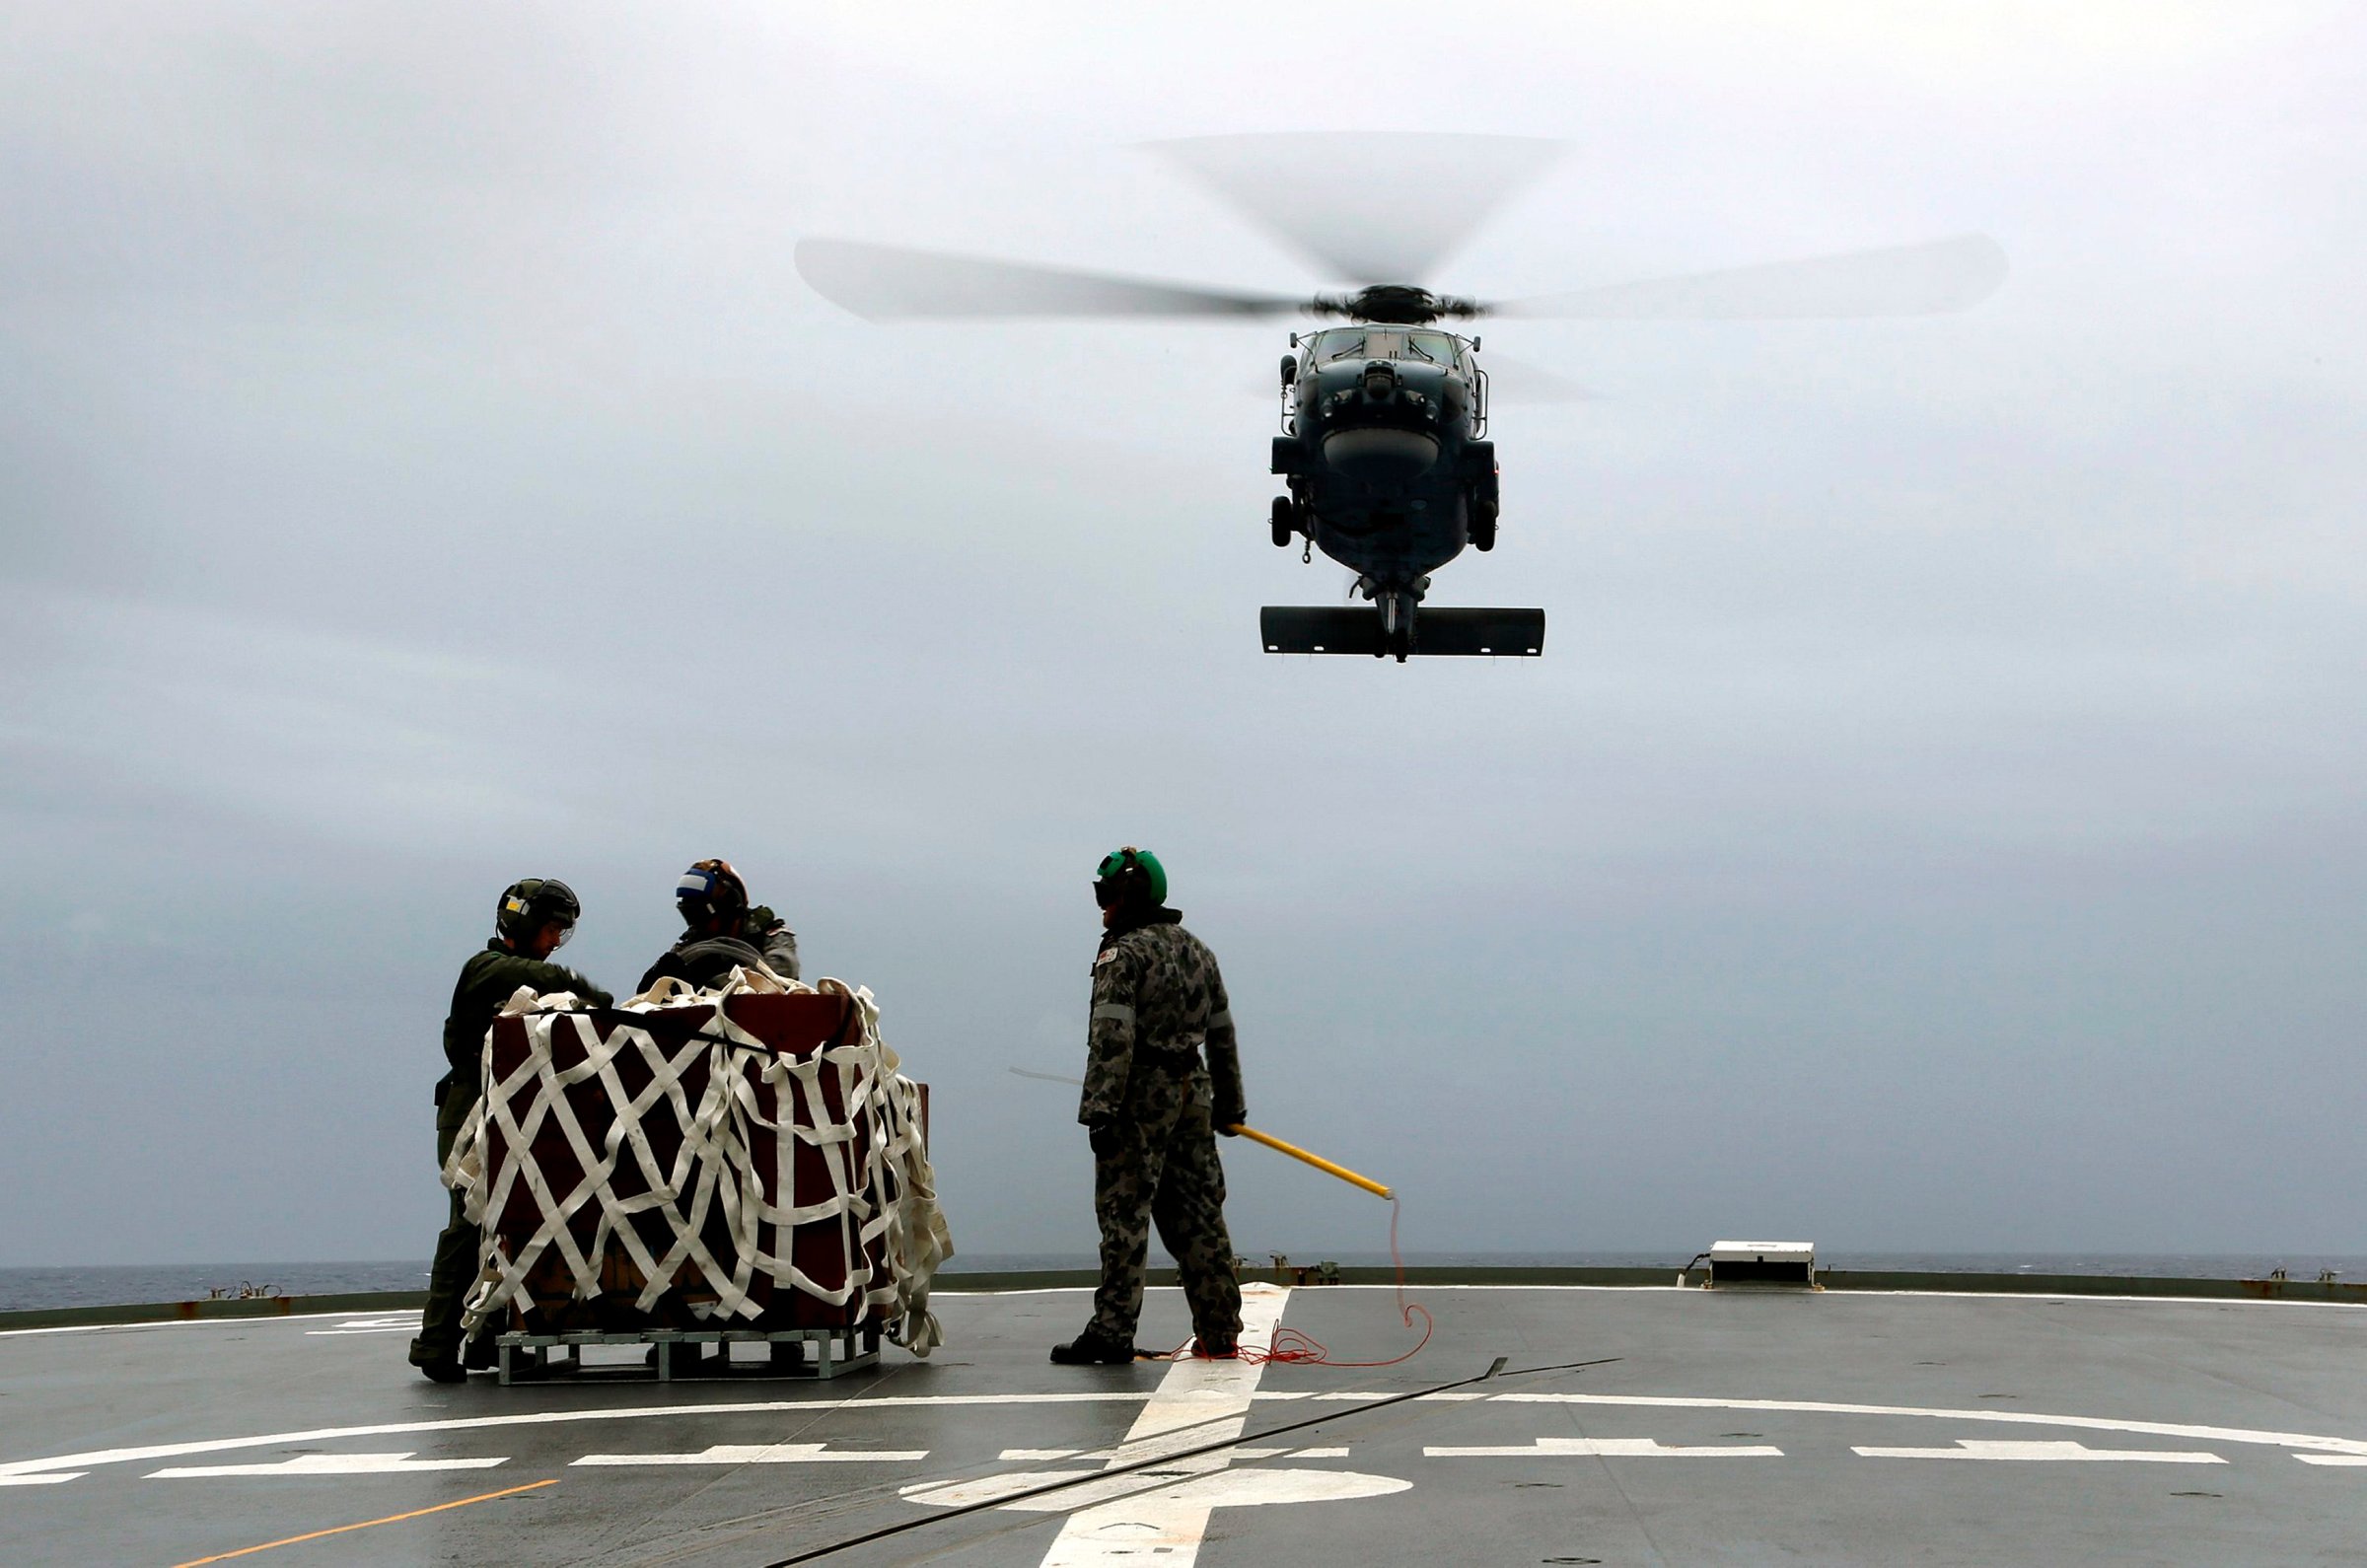 A S-70B-2 Seahawk (Tiger 75) helicopter approaches the flight deck of Australian Navy ship HMAS Toowoomba to pick up supplies during a vertical replenishment at sea with HMAS Success as they continue to search for the missing Malaysian Airlines flight MH370 in this picture released by the Australian Defence Force April 6, 2014.